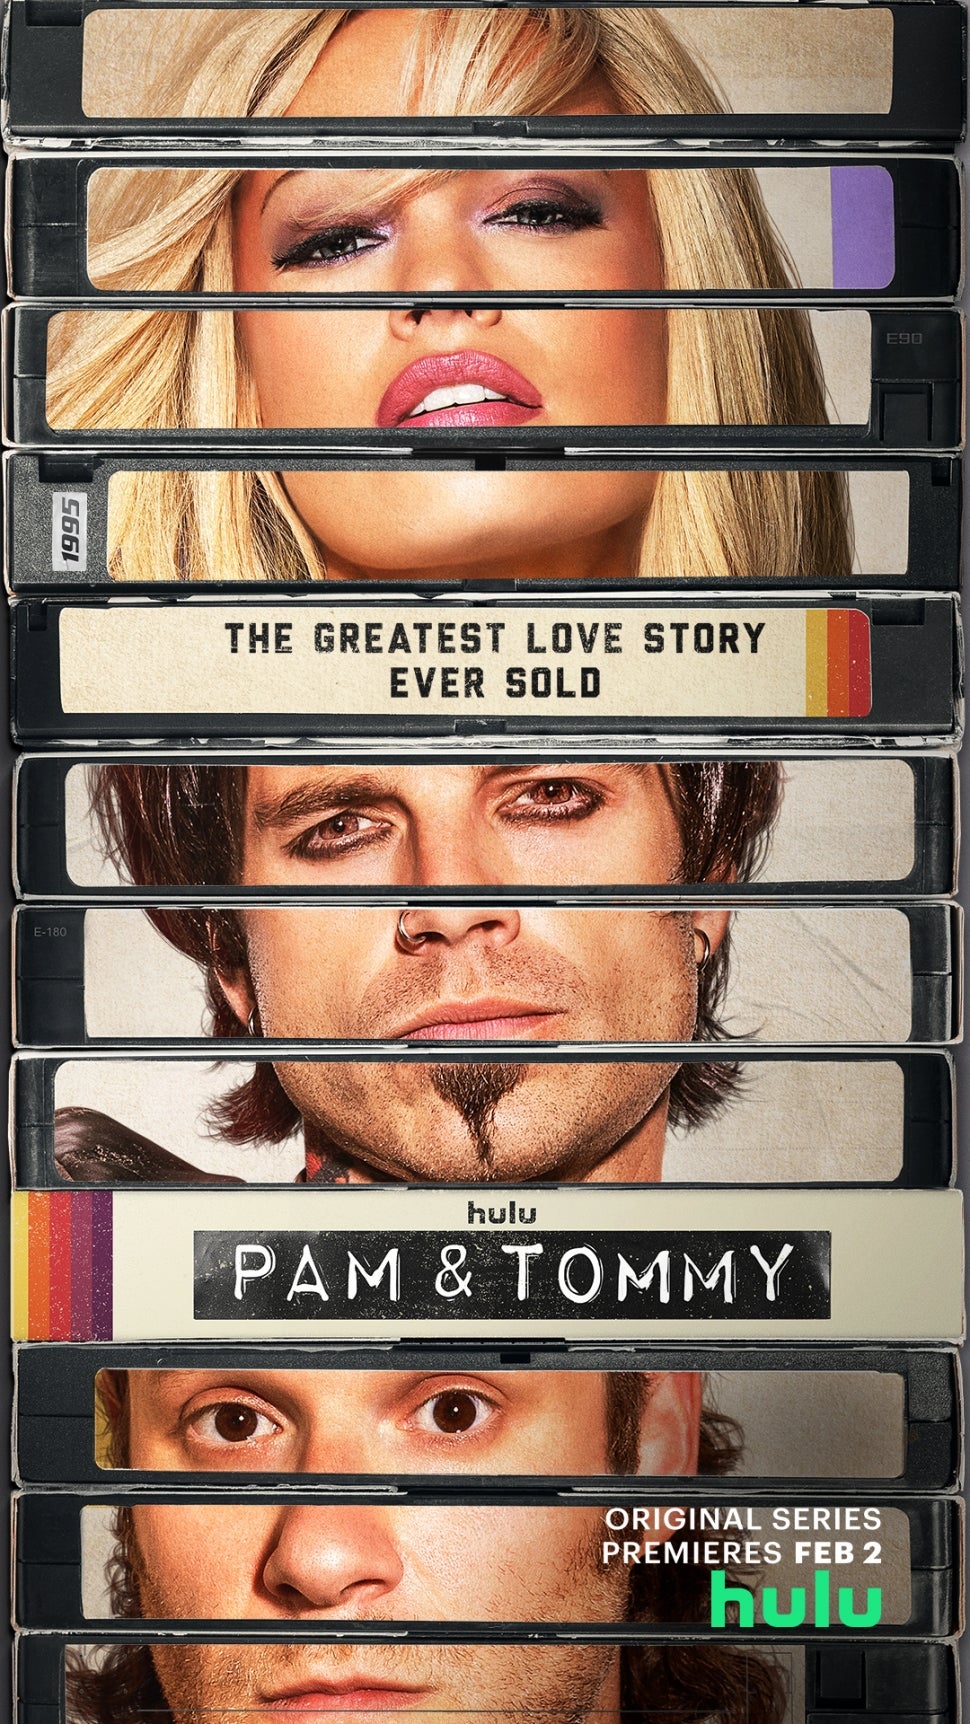 Download Xxx Of Amy Enderson Videos In 3gp - Pam & Tommy' Trailer Shows Another Side of Pamela Anderson and Tommy Lee's  Sex Tape Scandal | Entertainment Tonight